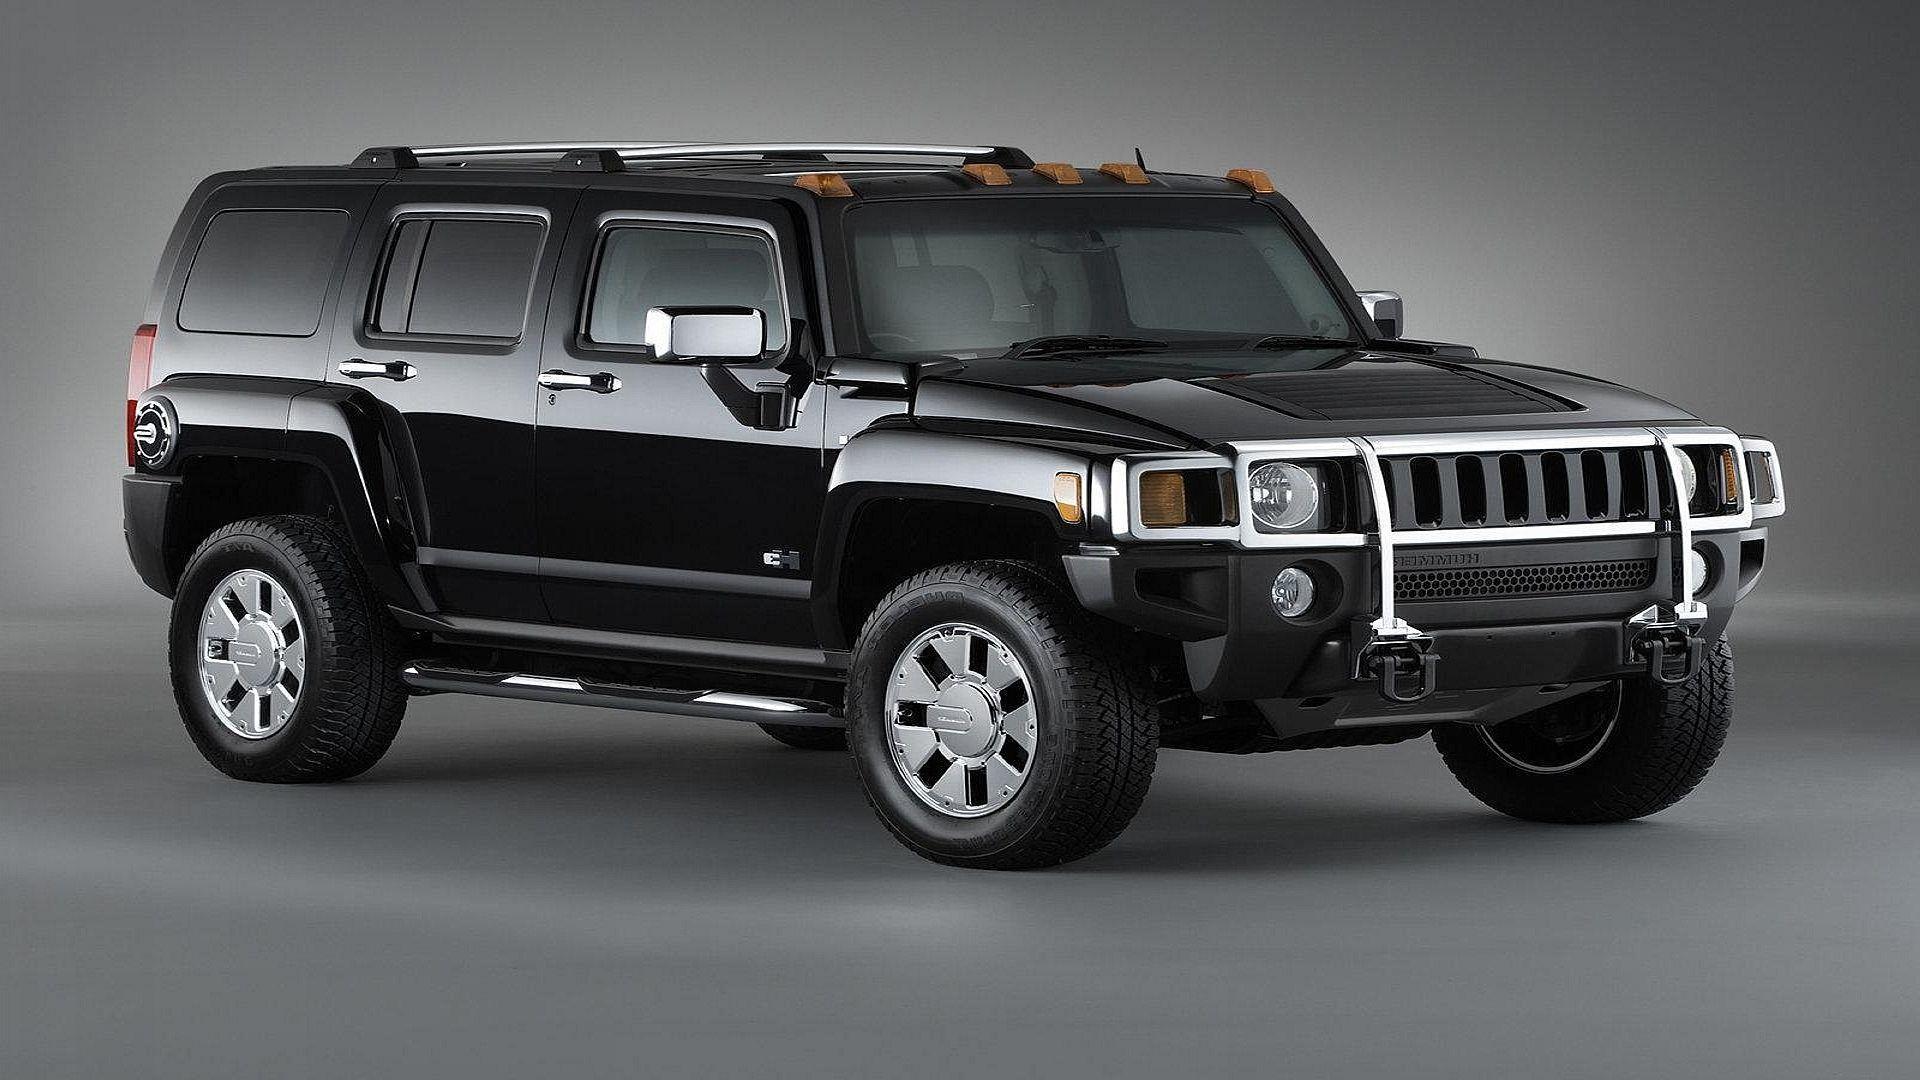 Hummer Car Wallpaper Wallpaper Background of Your Choice